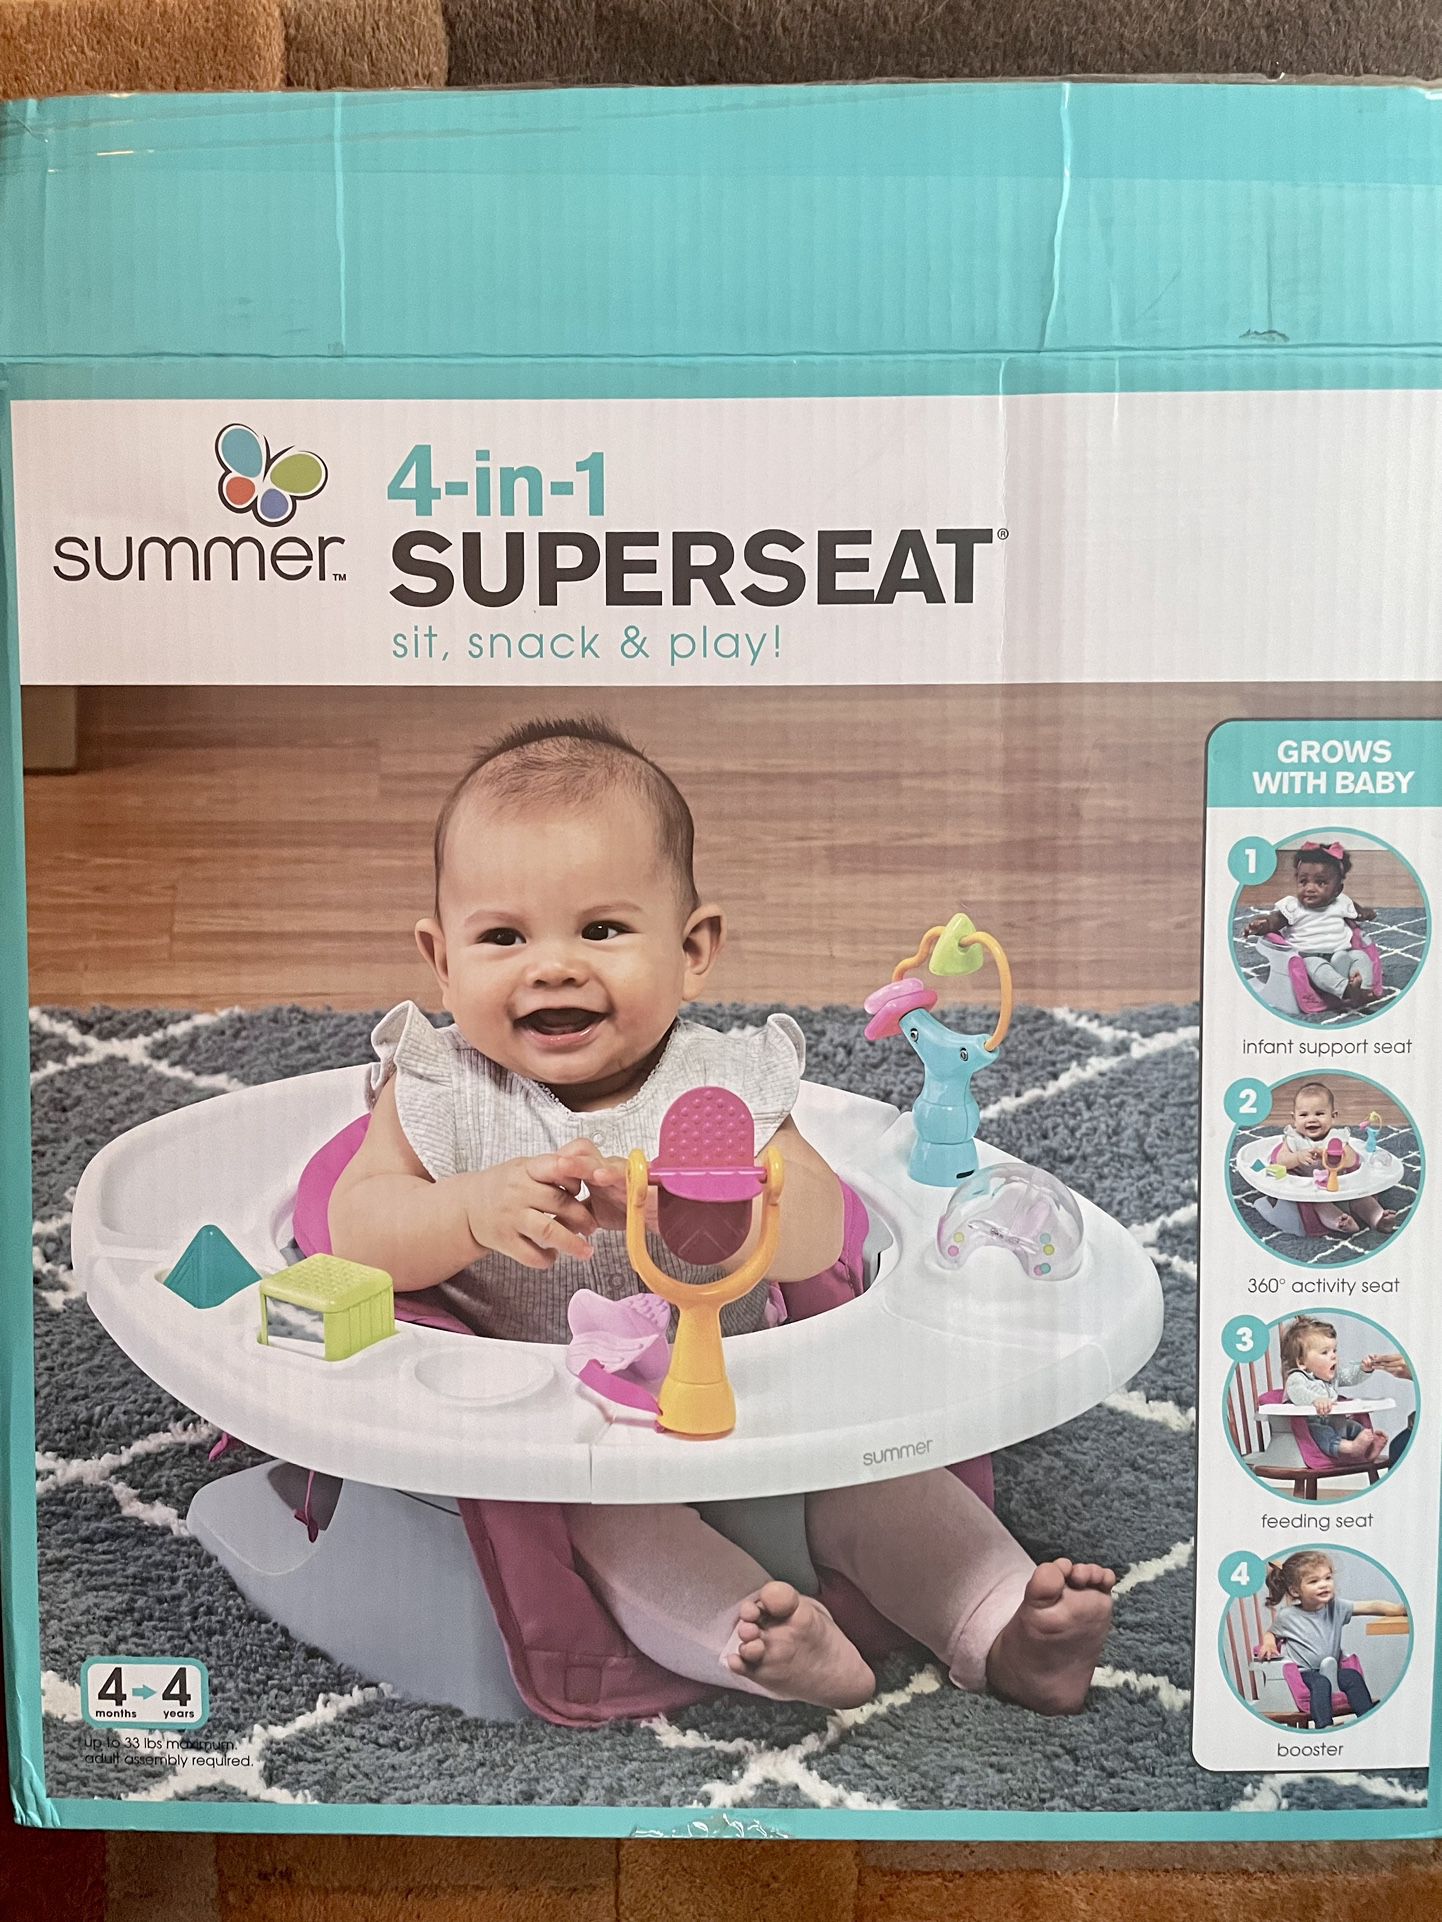 4-in-1 SUPERSEAT 